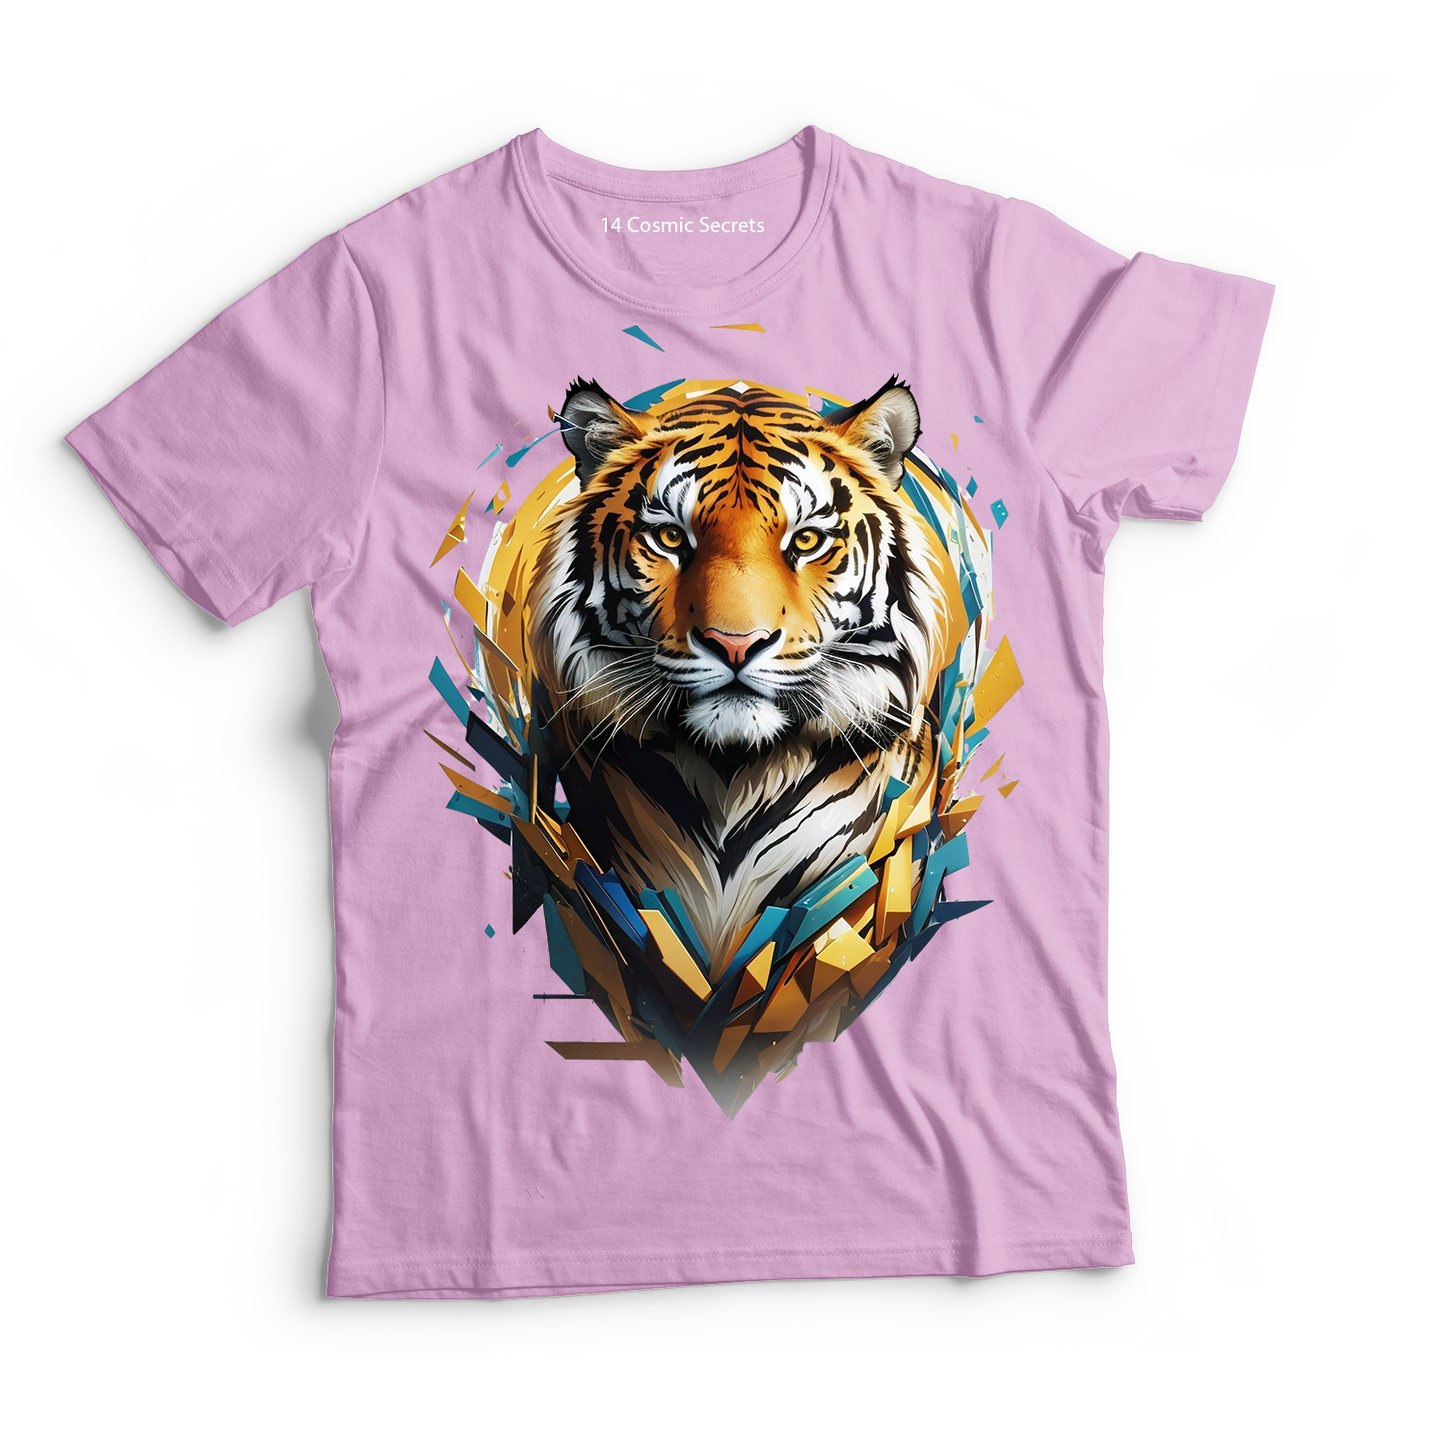 Tiger Kingdom Threads Graphic Printed T-Shirt  Cotton T-Shirt Magnificence of India T-Shirt 🐯🐯🐯🐯🐯